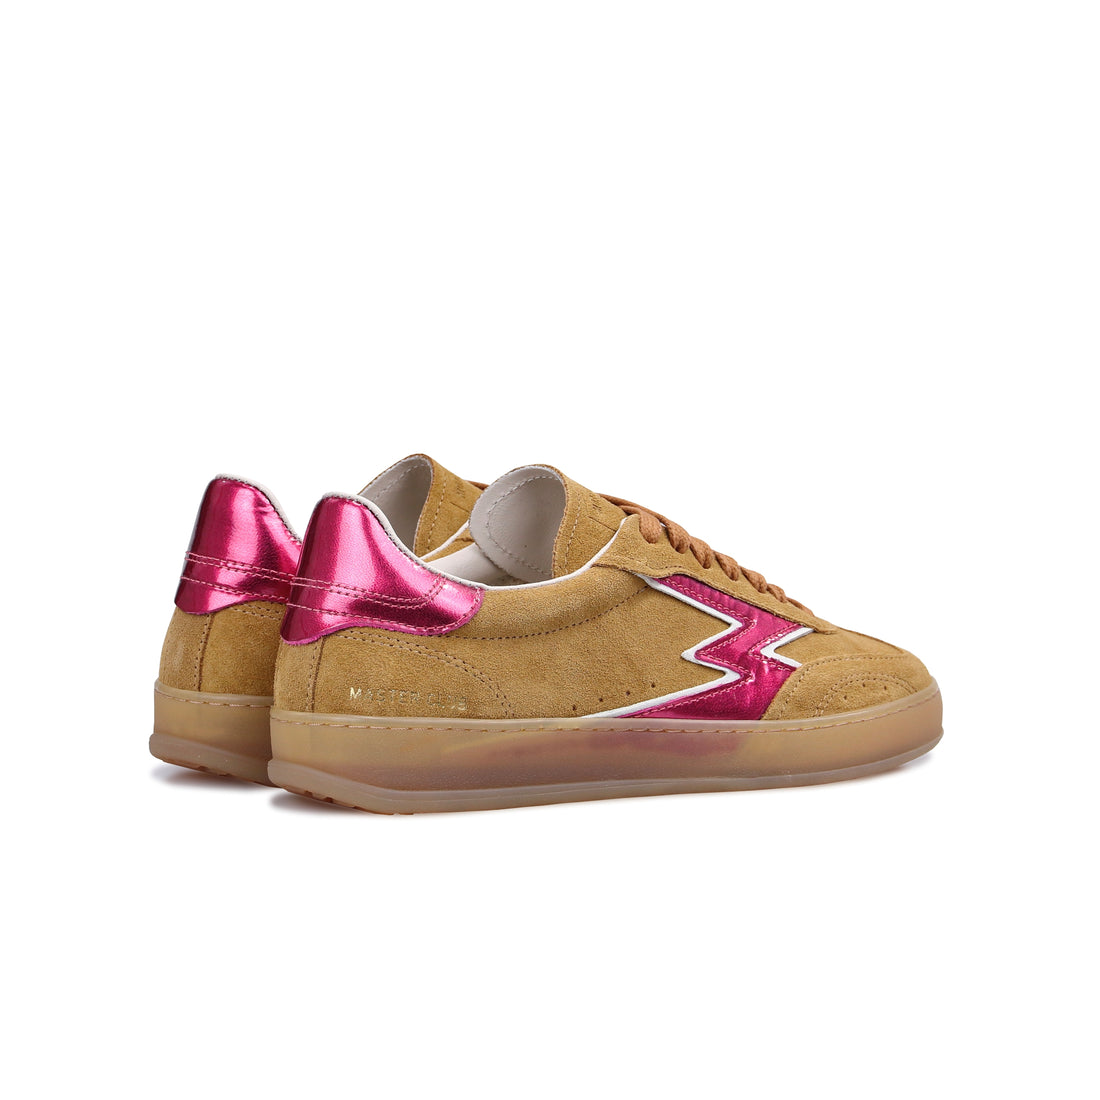 Club sneaker with pink laminated logo